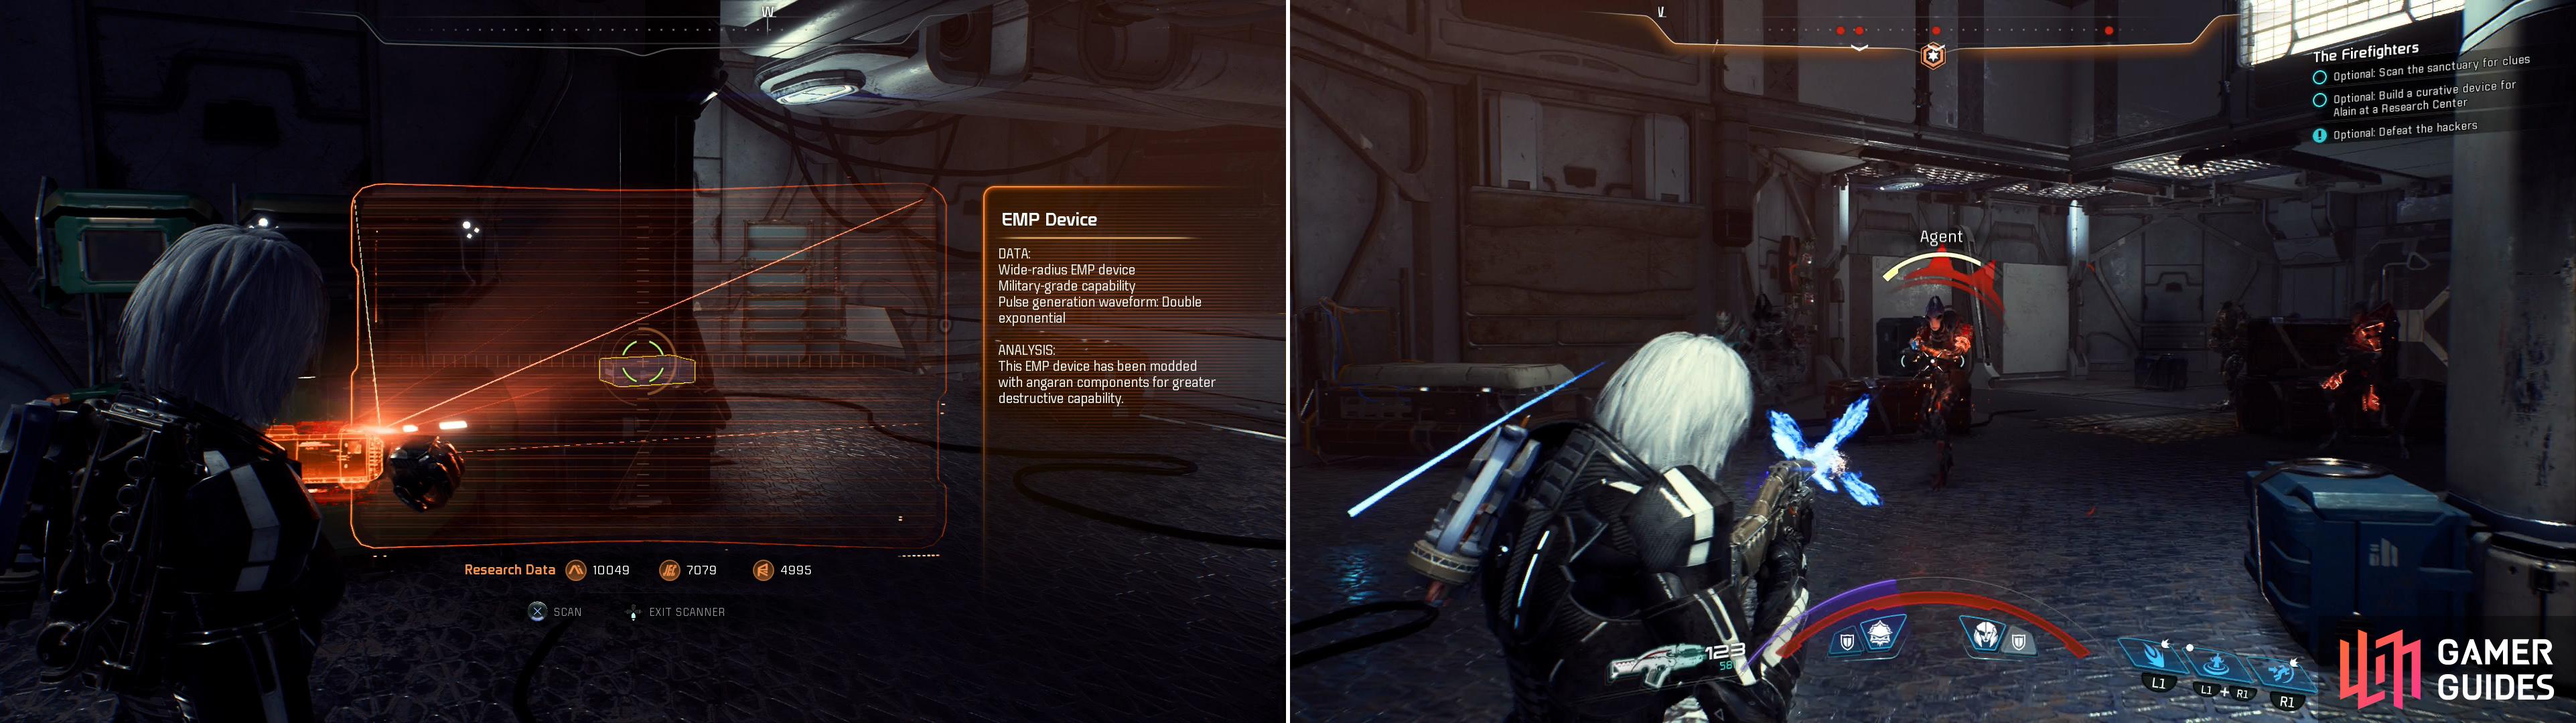 If you scan too many objects in the sanctuary (left) you'll expose yourself and provoke the anti-AI fanatics (right).